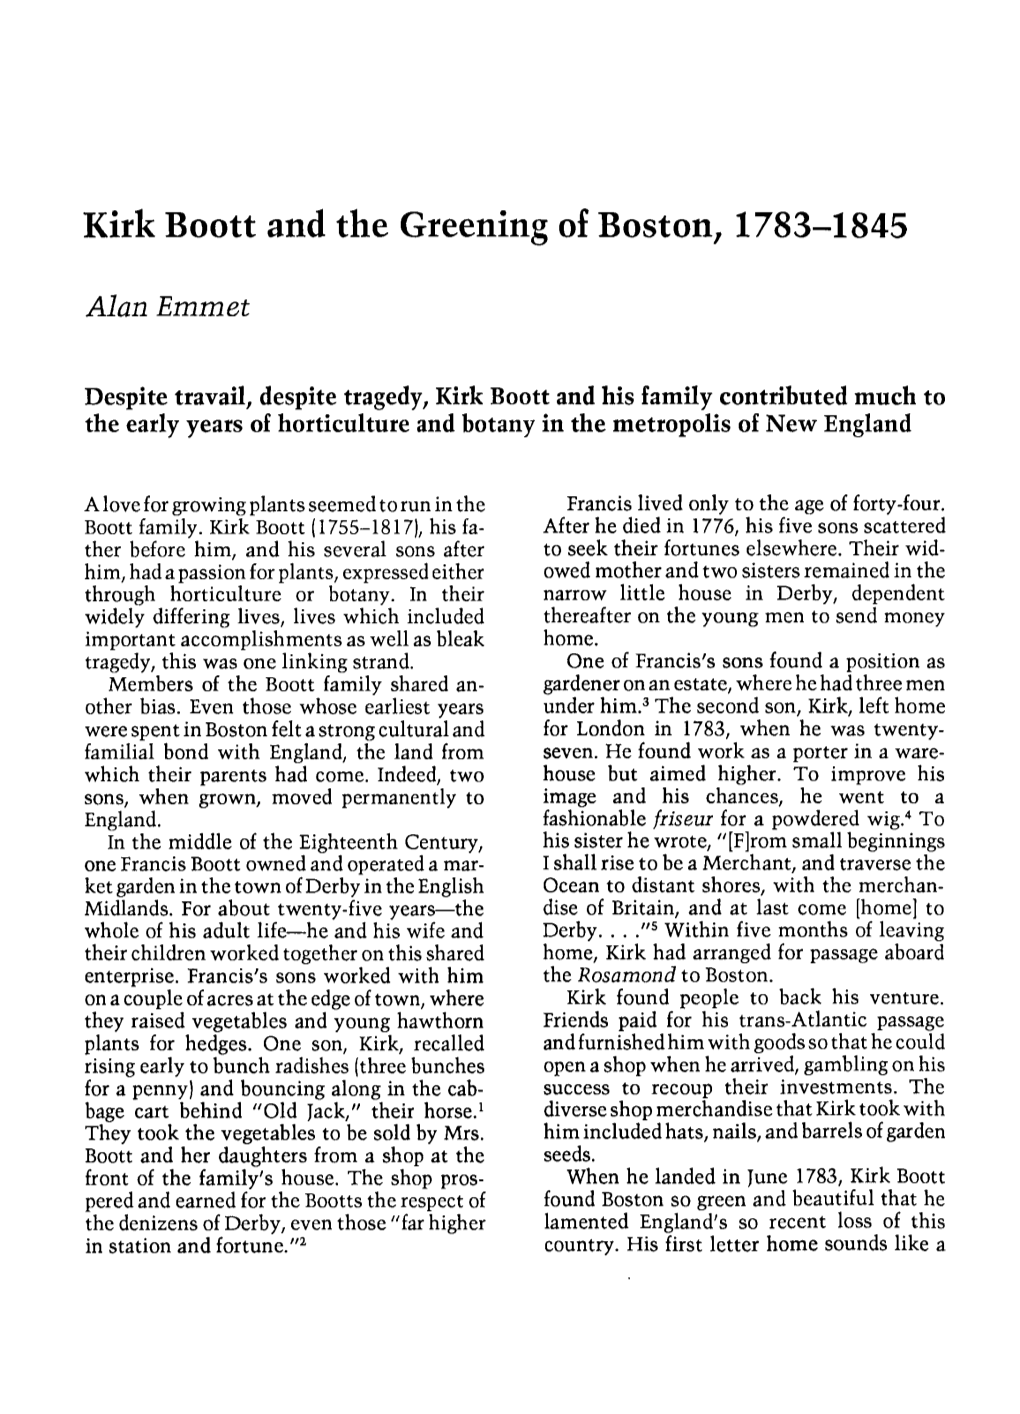 Kirk Boott and the Greening of Boston, 1783-1845